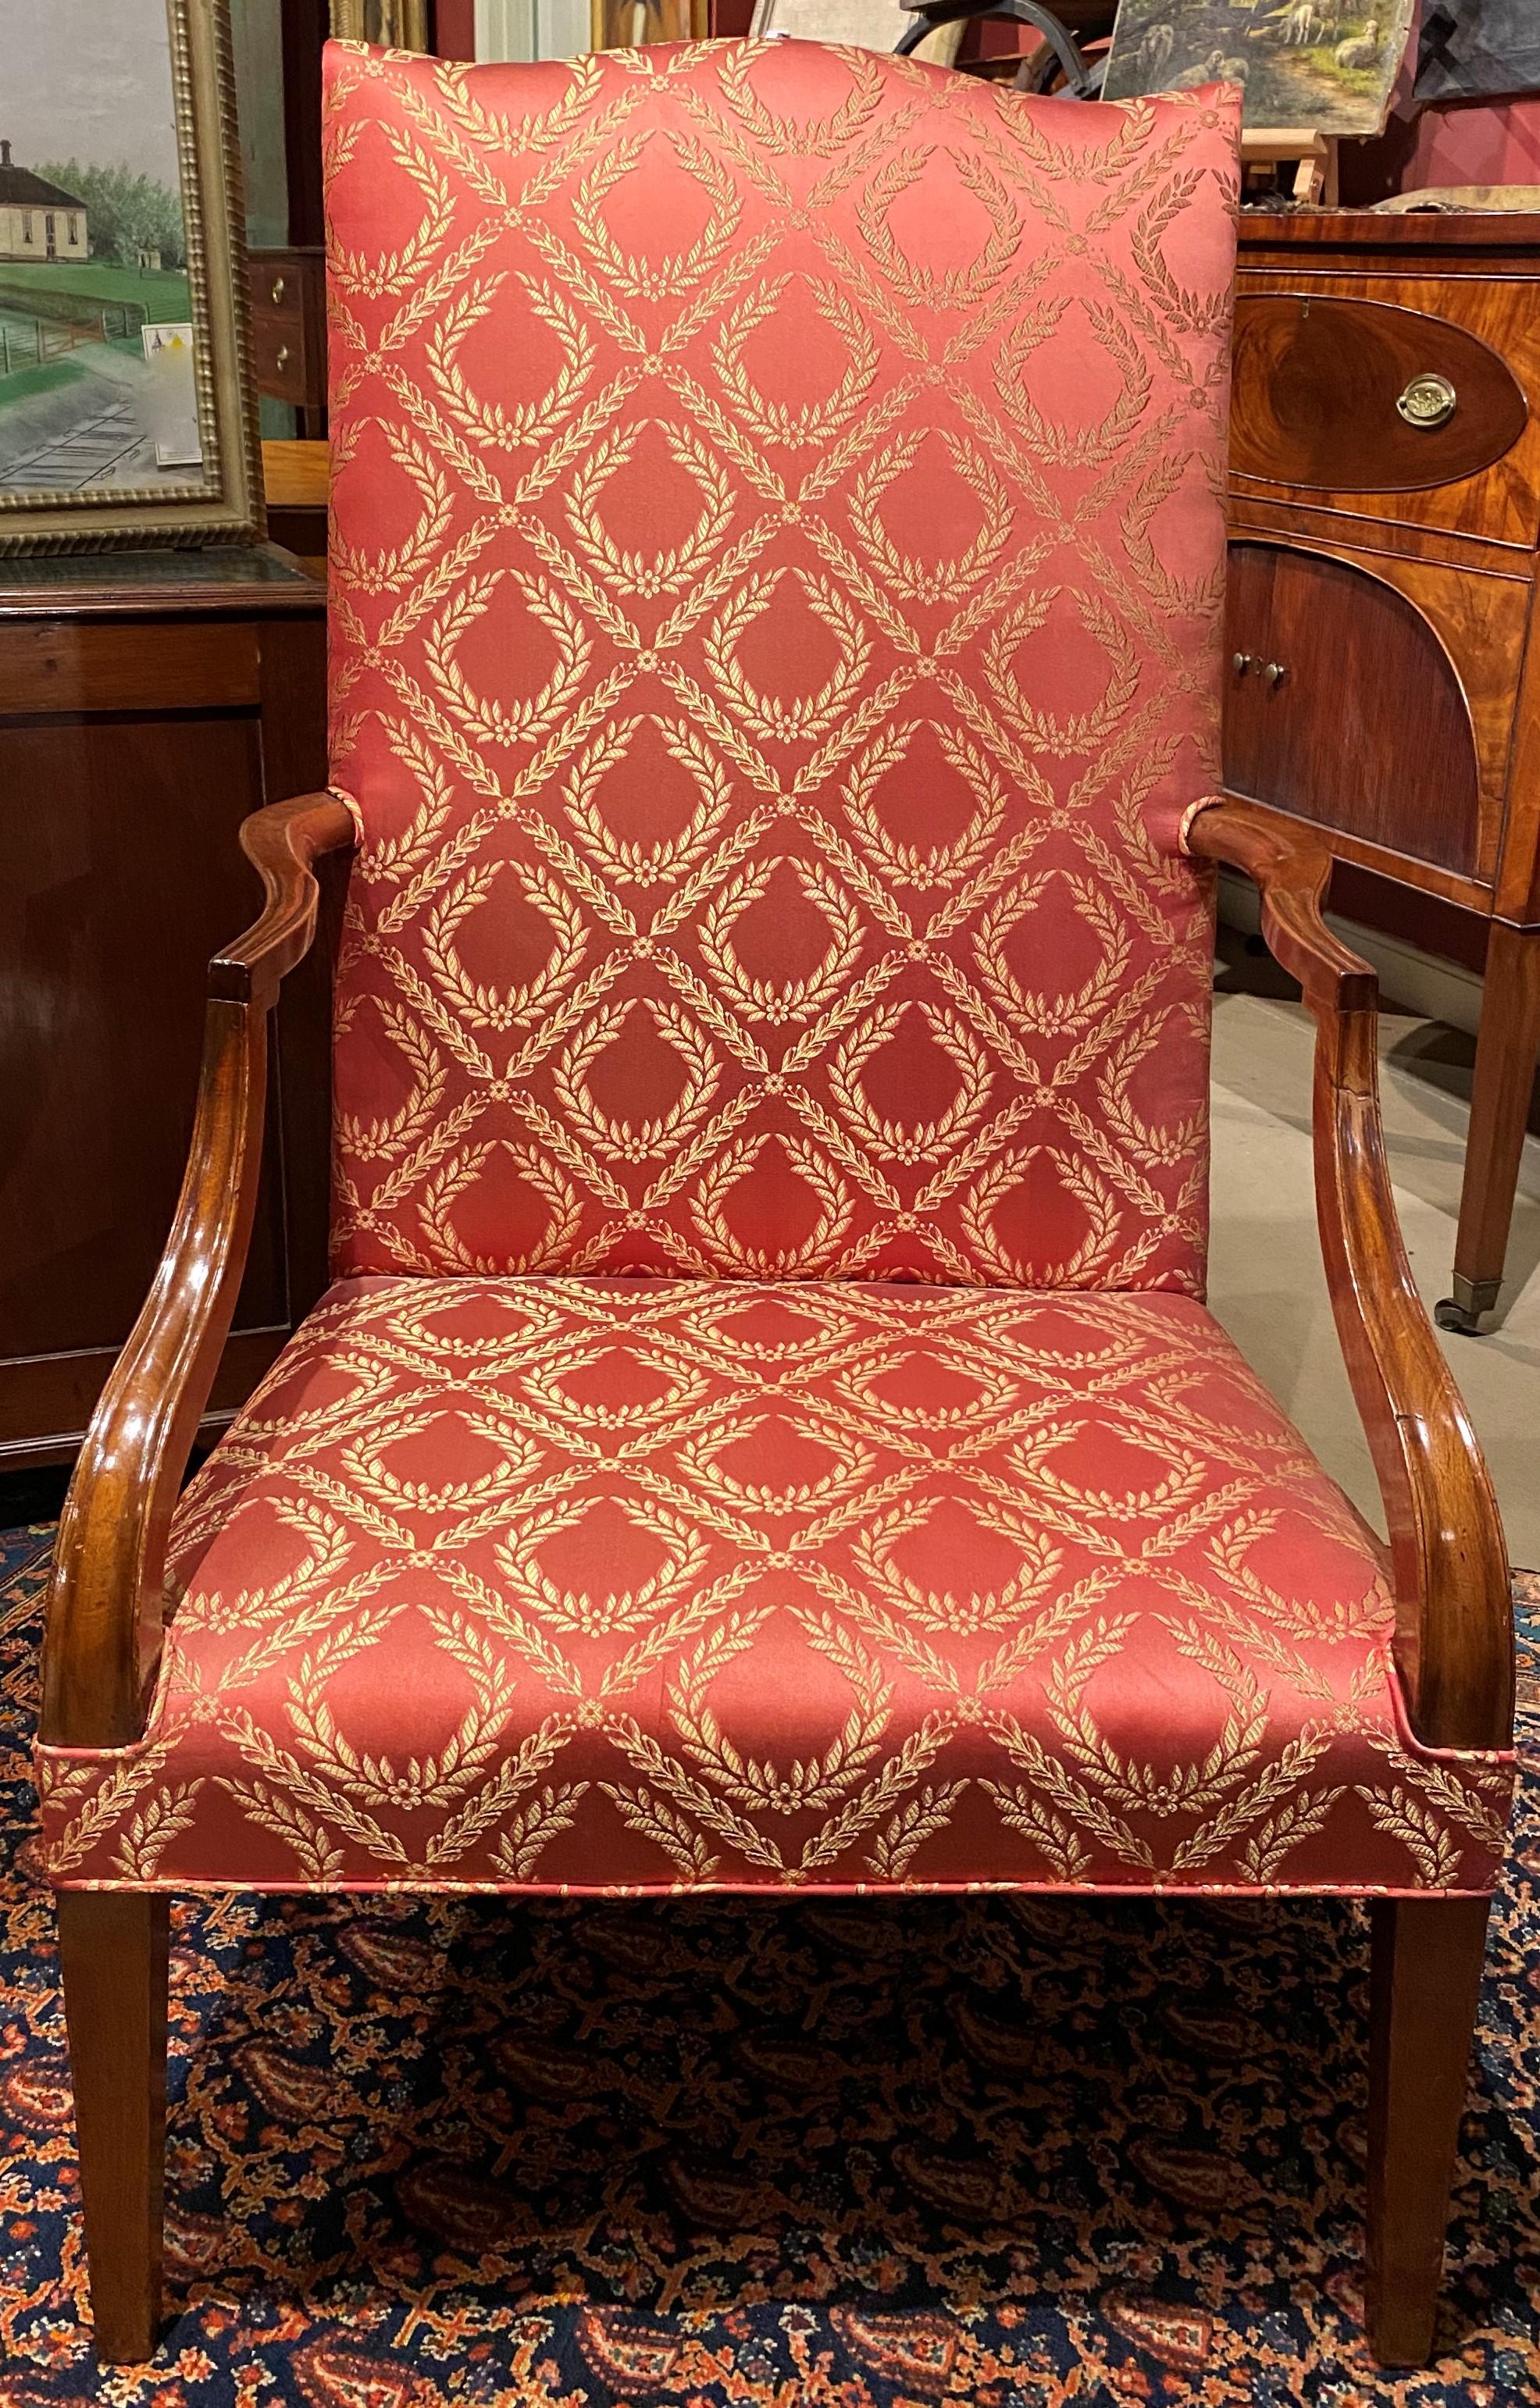 A fine Federal mahogany lolling chair with fresh red satin upholstery featuring gold wheat accent pattern, circa 1785. Provenance: Bernard & S. Dean Levy, New York. Very good overall condition, with minor arm repairs and light overall wear